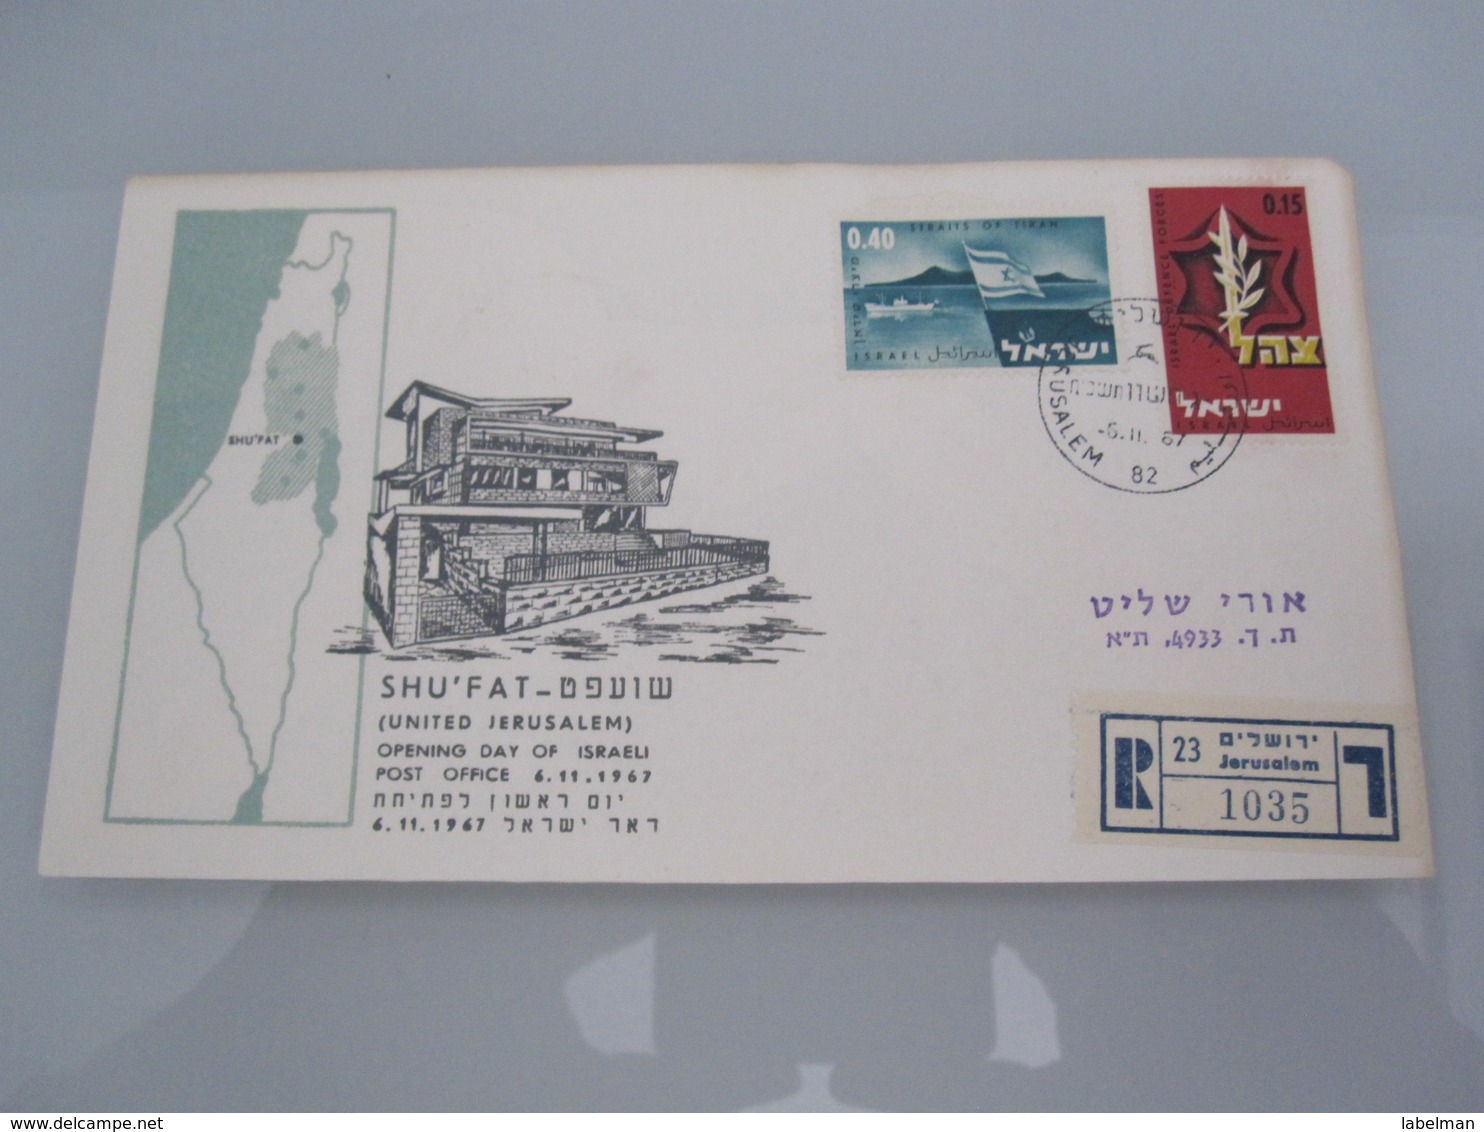 1967 POO FIRST DAY POST OFFICE OPENING SHUAFAT JERUSALEM JORDAN ISRAEL MILITARY ADMINISTRATION ENVELOPE COVER CACHET MAP - Covers & Documents